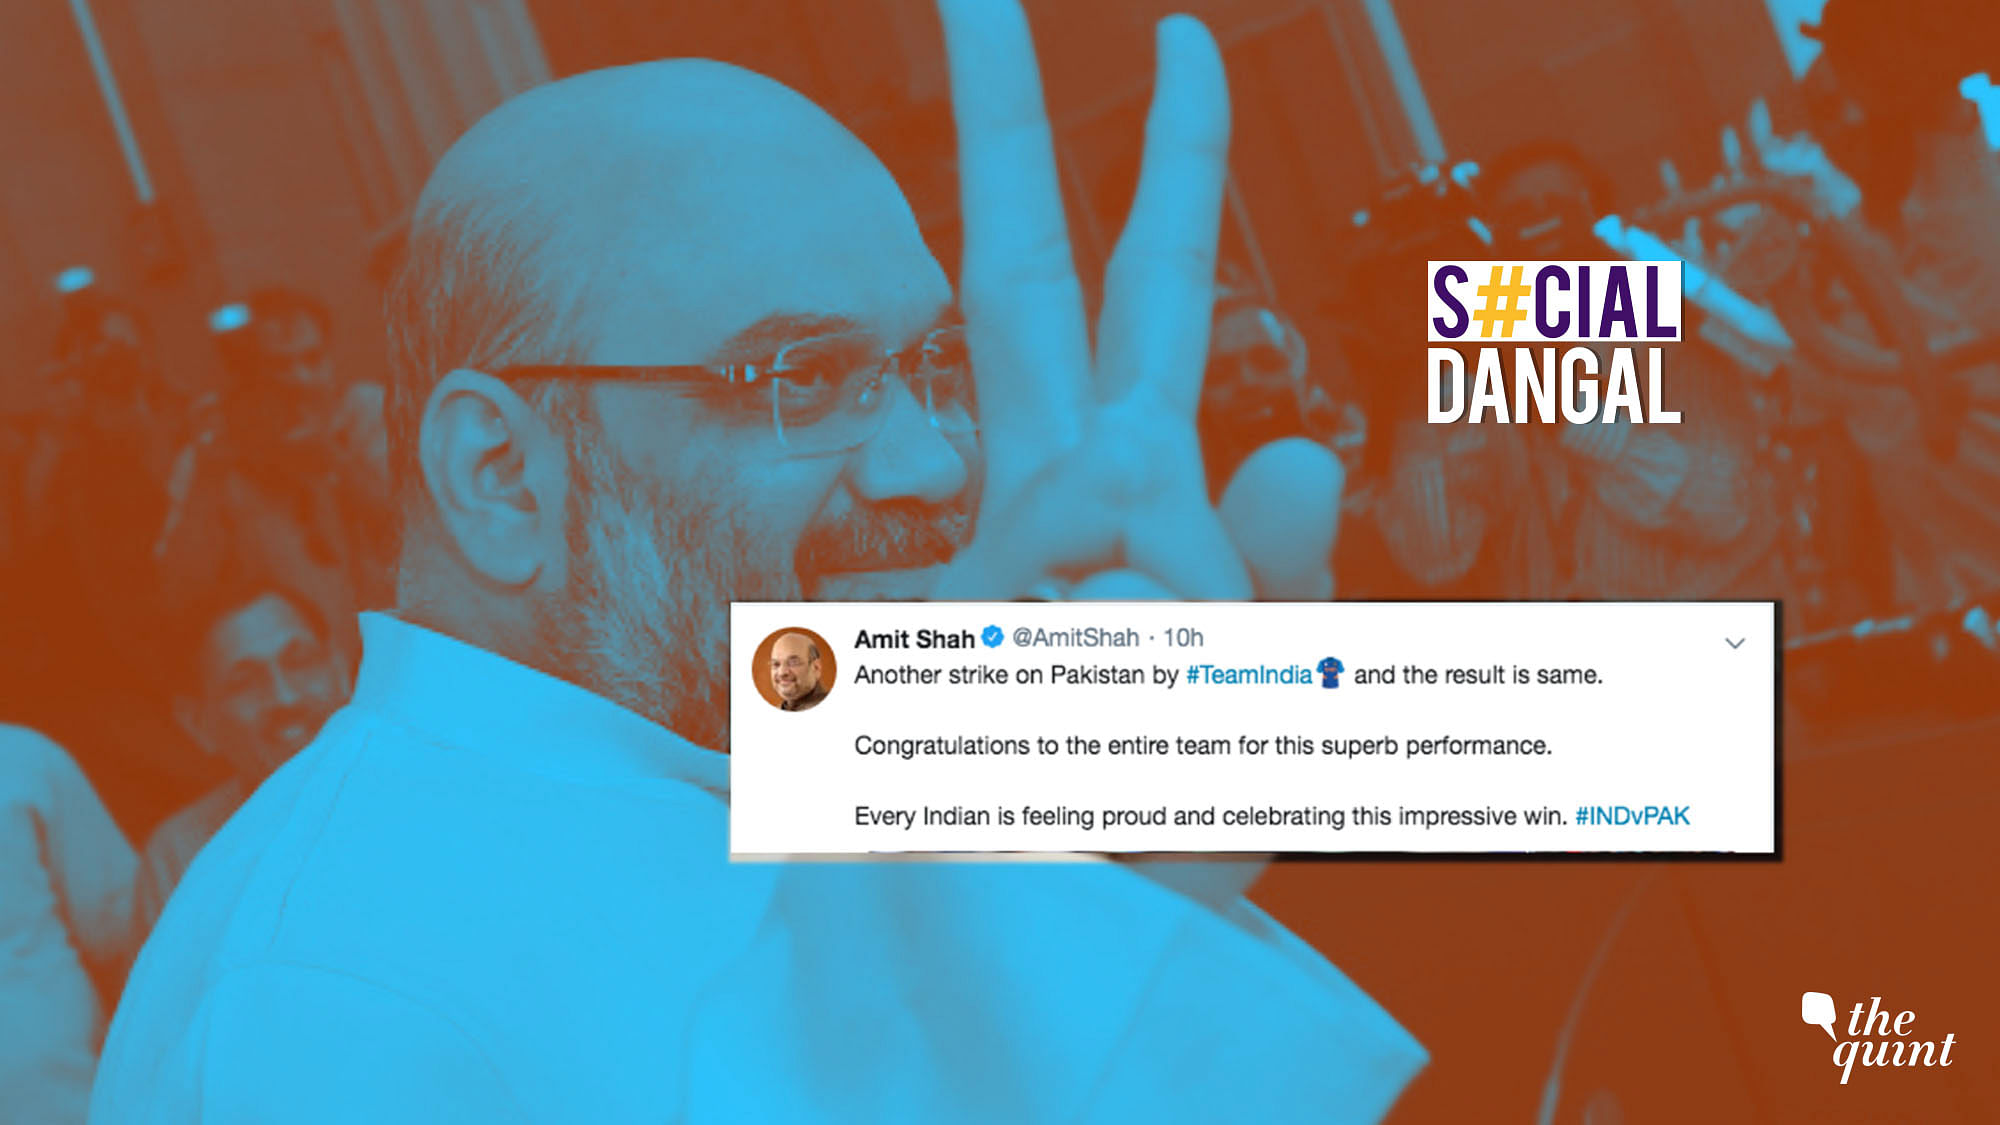 Home Minister Amit Shah took to Twitter and called the win “another strike” by India.